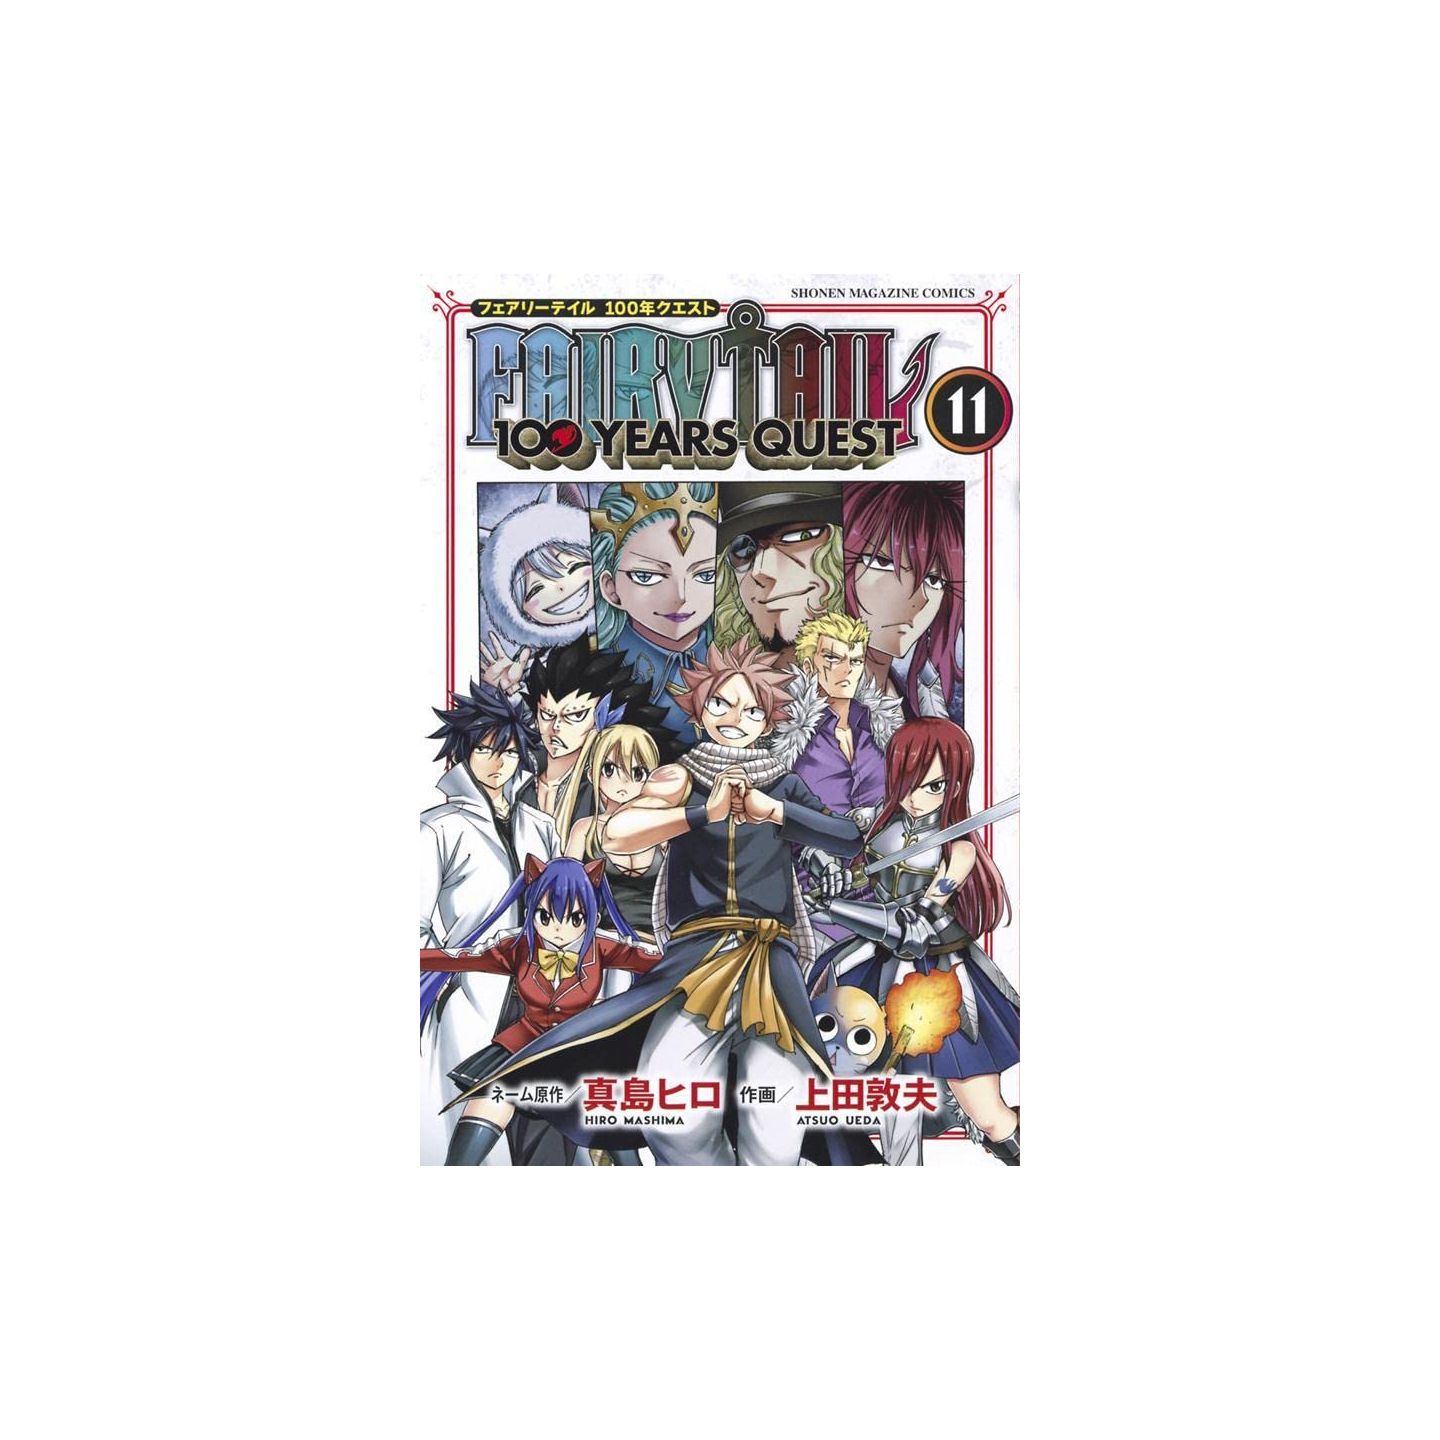 Years fairy quest 100 manga tail Fairy Tail